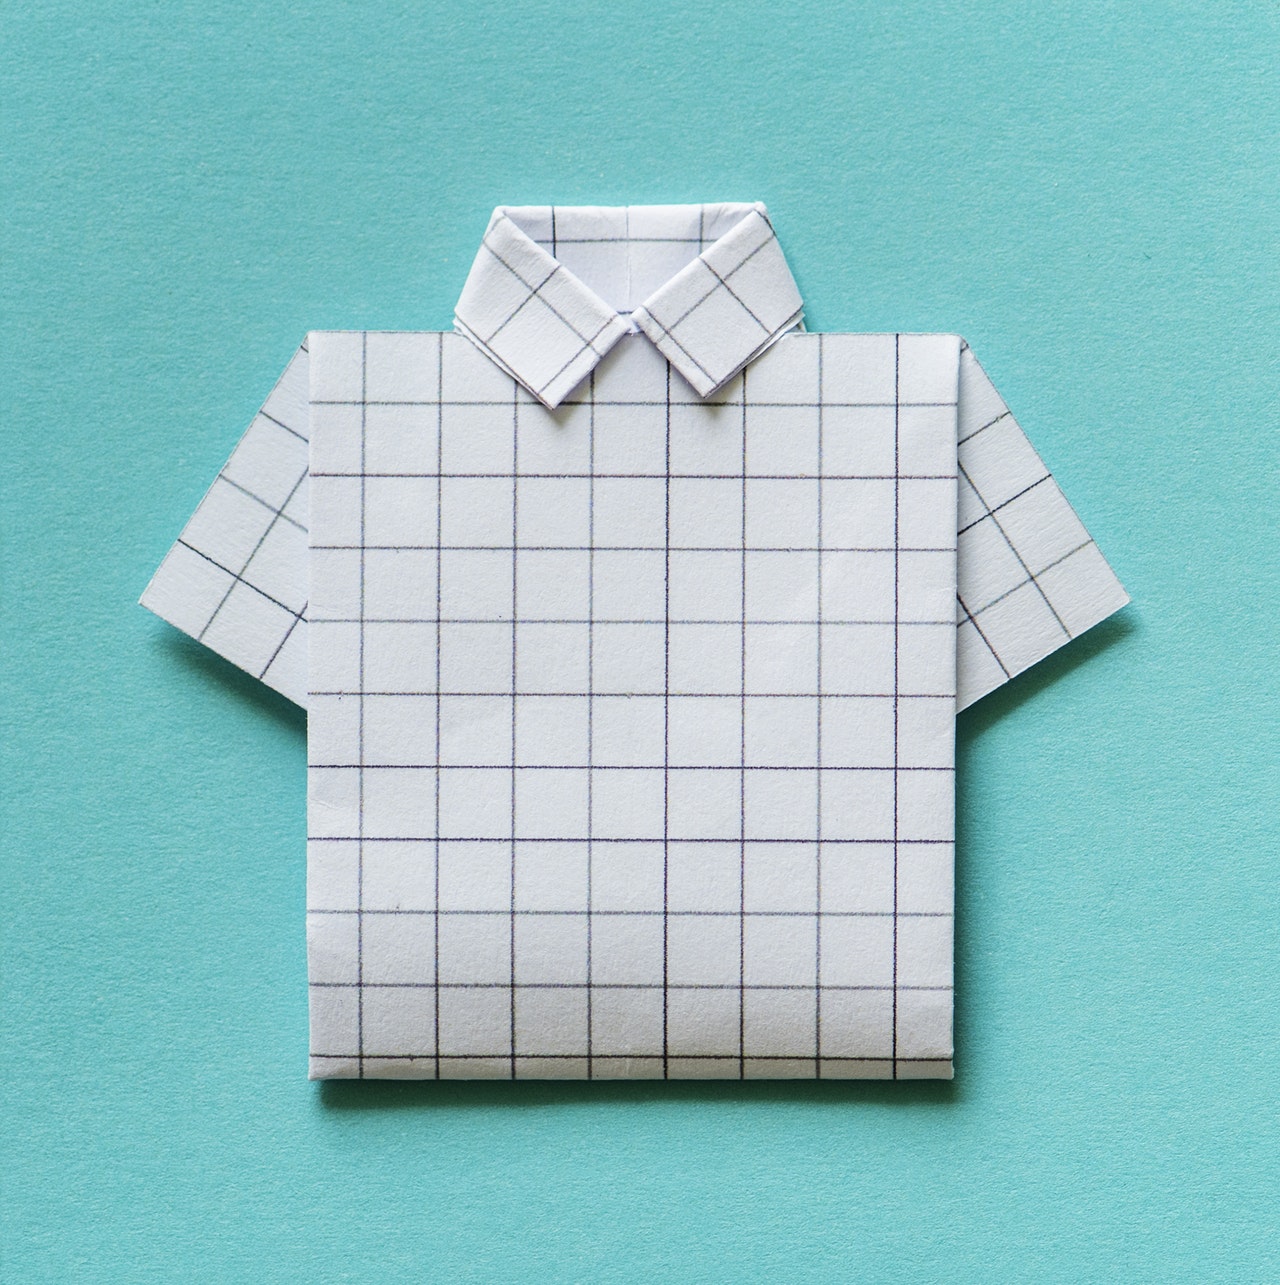 5 COOL FACTS YOU DIDN'T KNOW ABOUT SHIRTS.